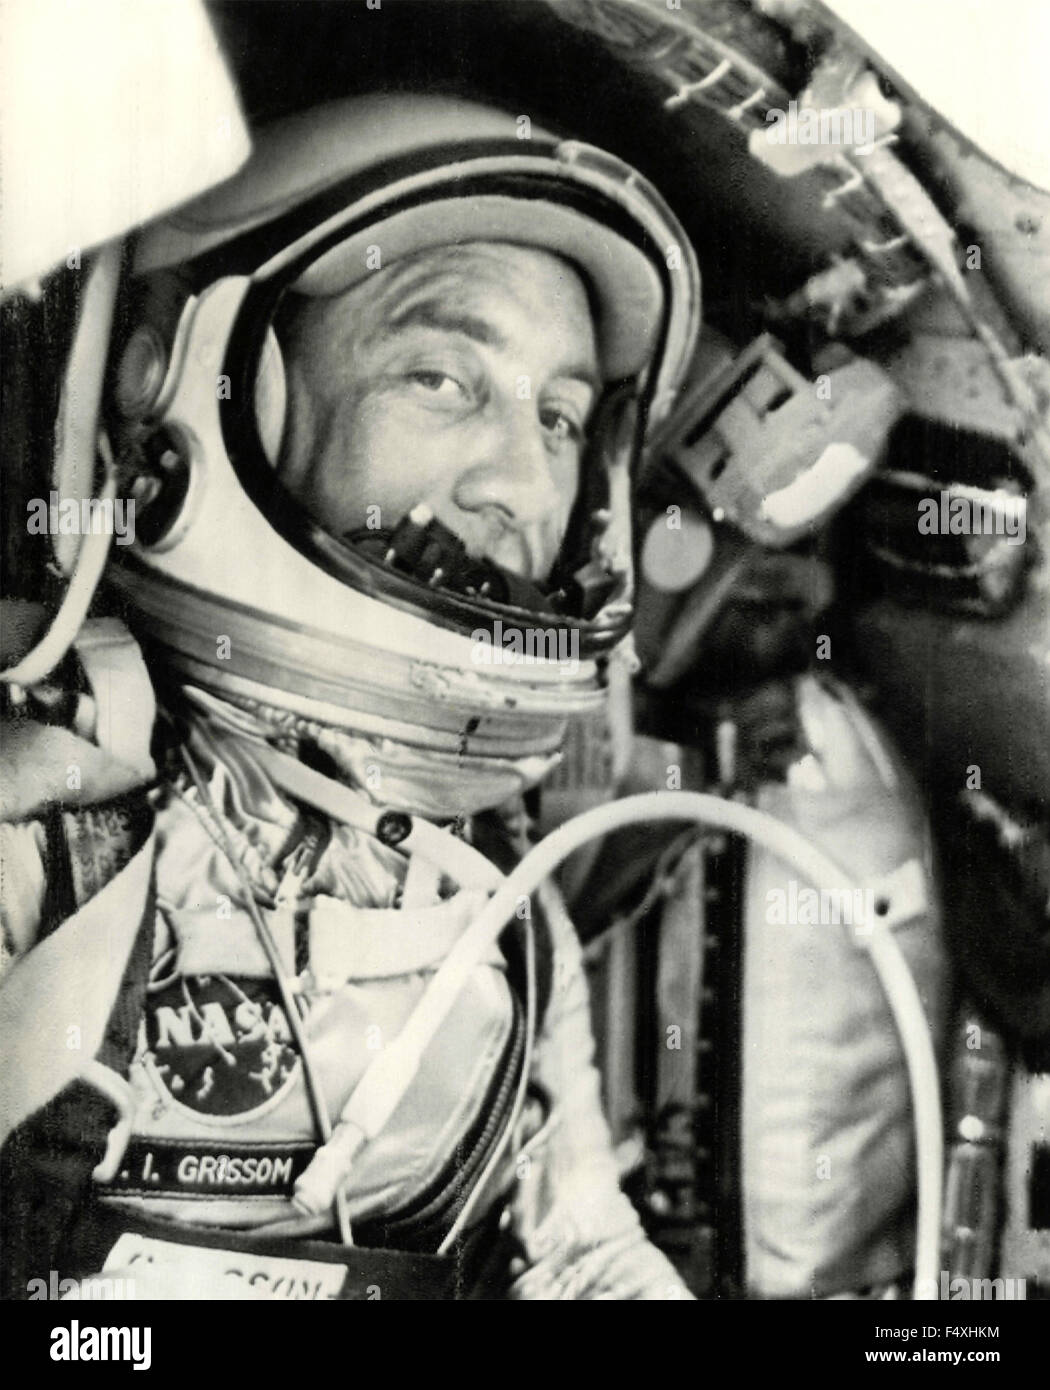 The American astronaut Virgil Grissom inside the space capsule for final preparations before the flight, Cape Canaveral, Fla. USA Stock Photo